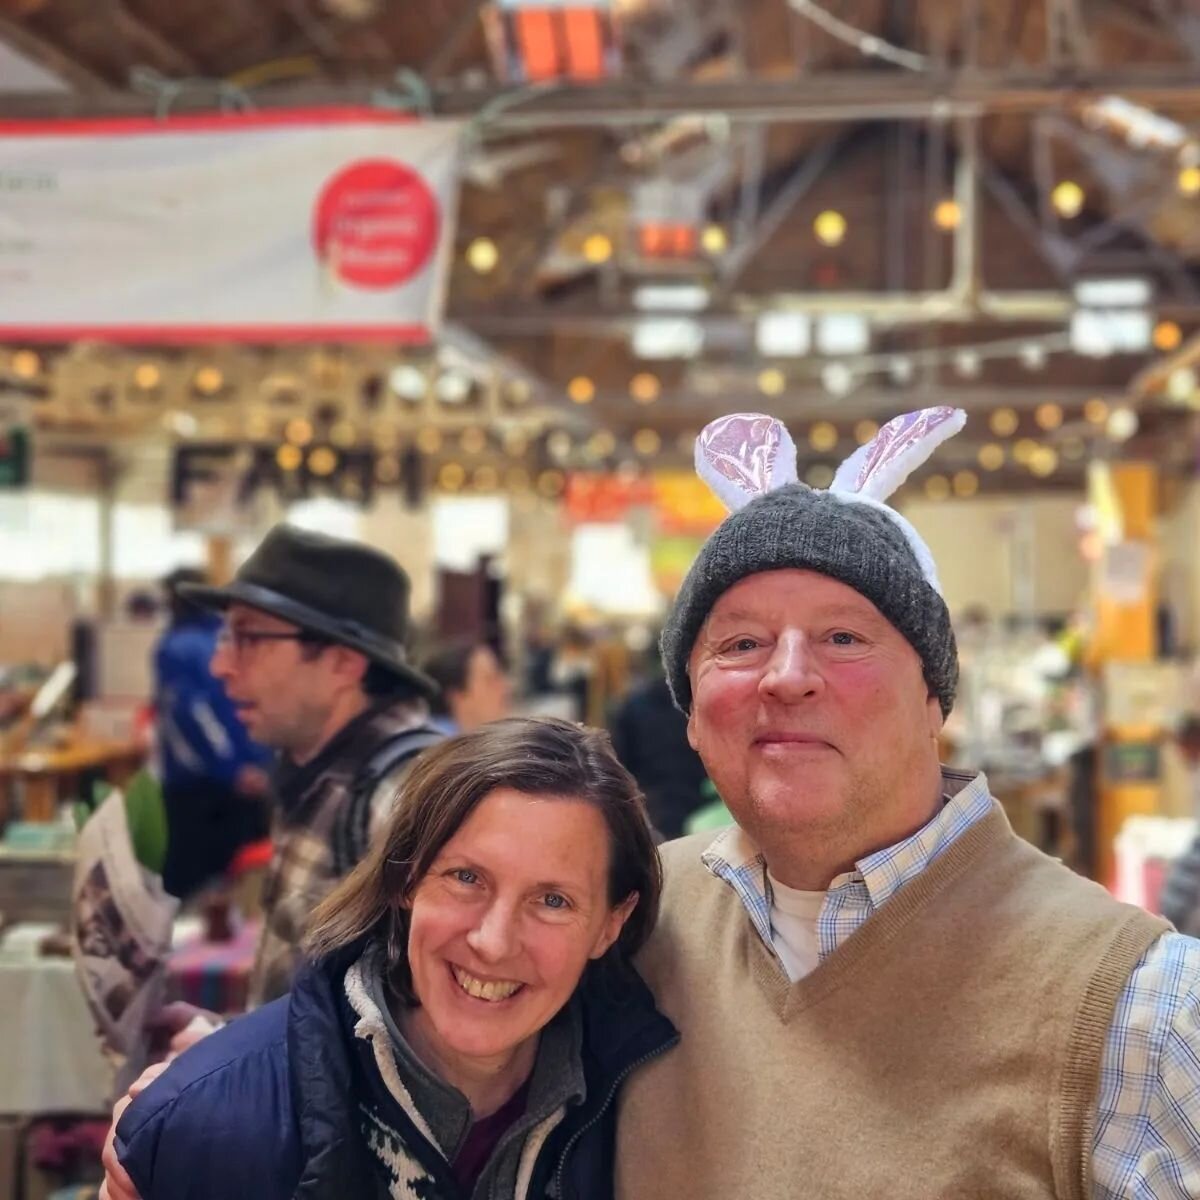 Thanks to the 450+ folks who hopped over to the Market on Saturday. We're open every Saturday, 10am-2pm

#farmersmarket #cooperstownny #wegootsego